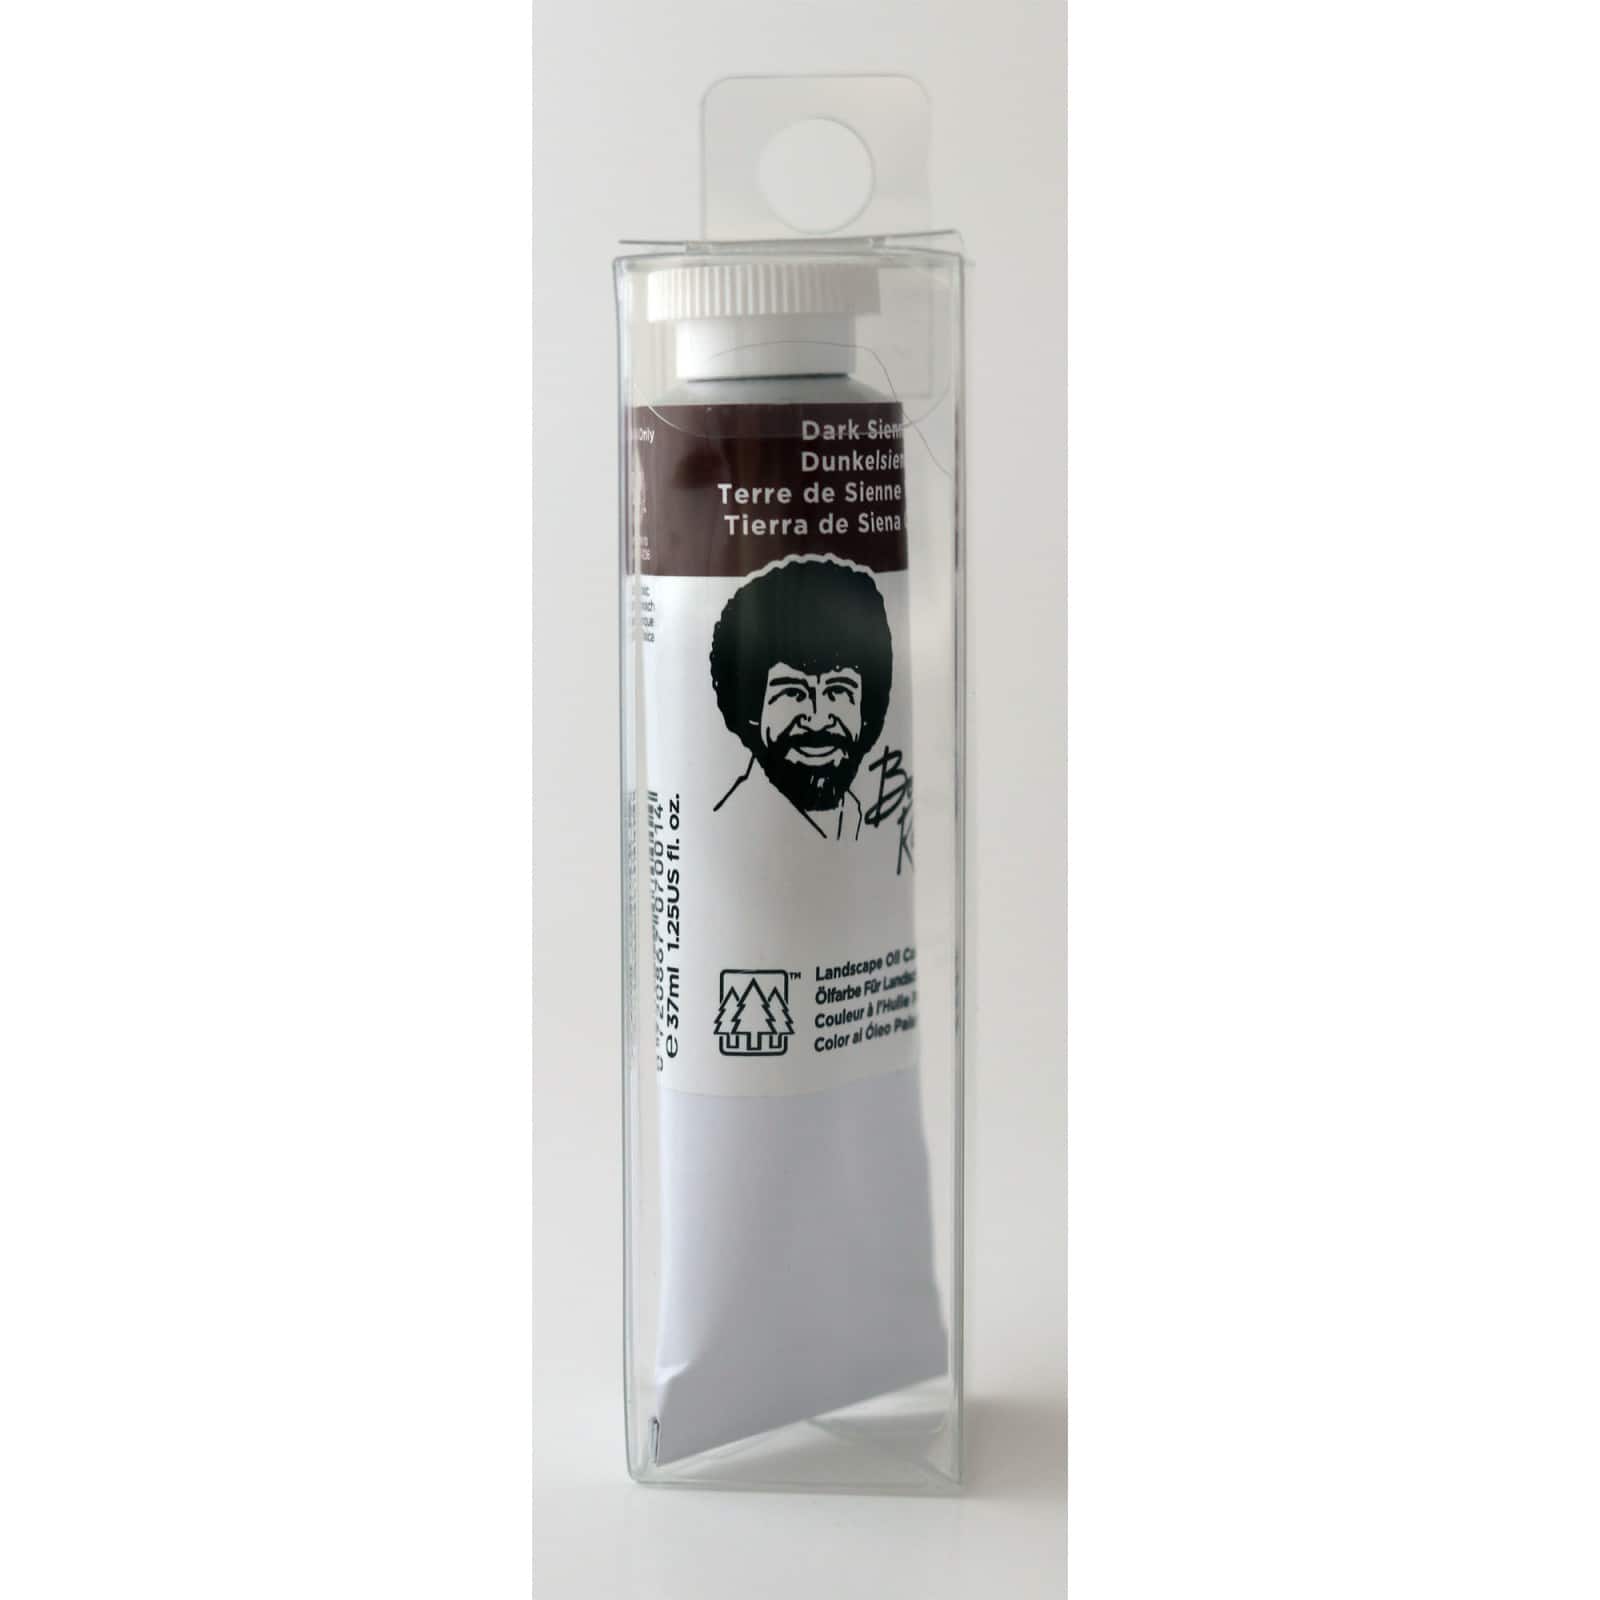 Painting Supplies - Accessories - Easels - Bob Ross Inc.